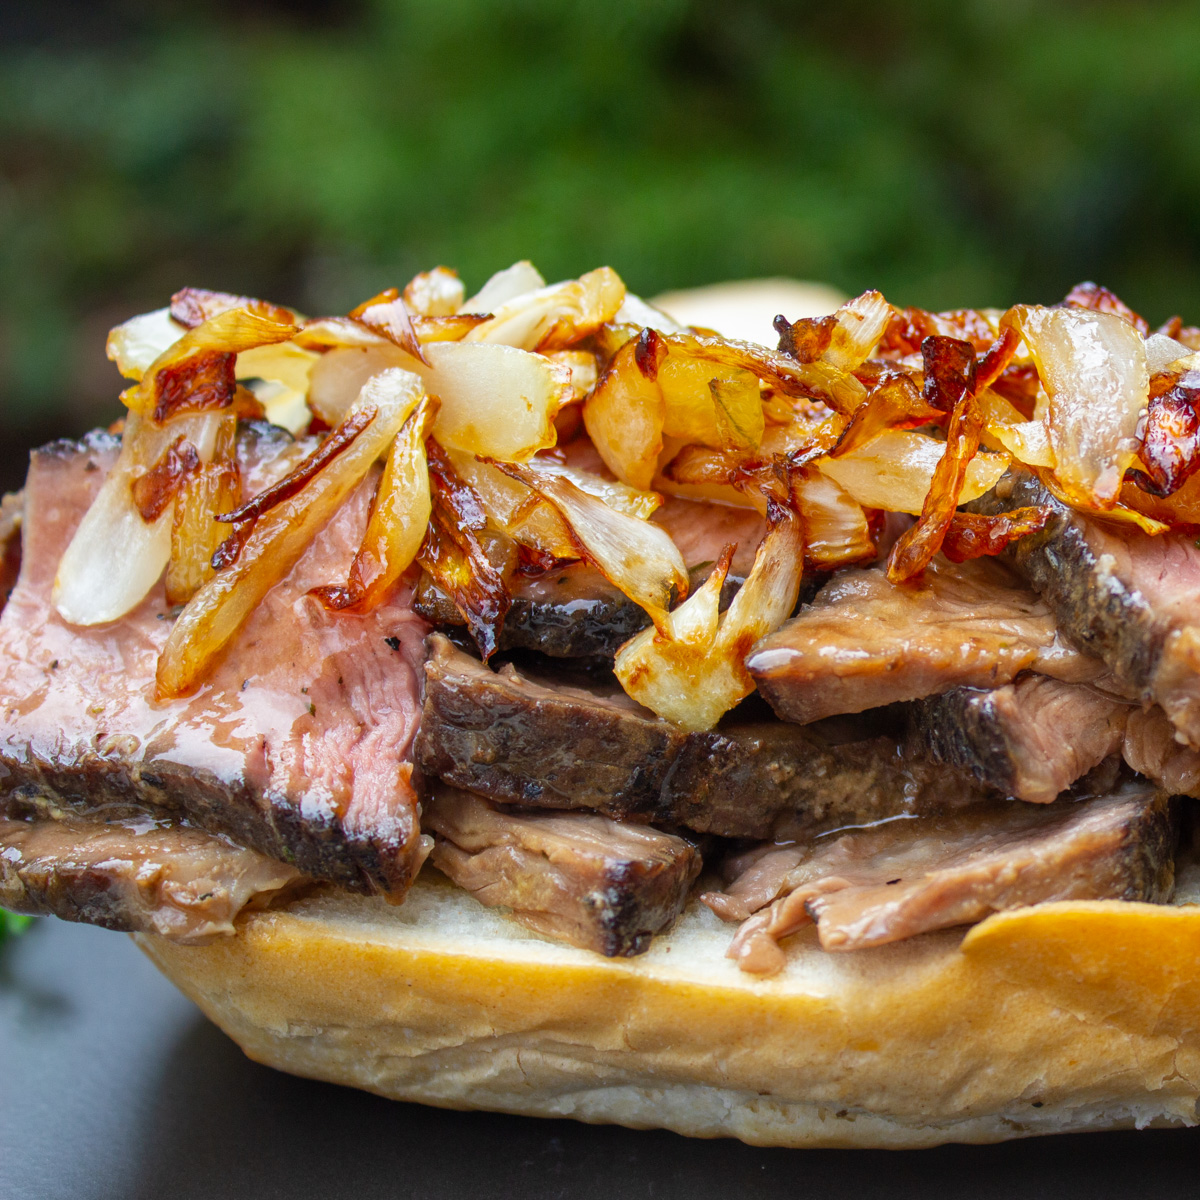 beef chuck roast sliced on bread with caramelized onions